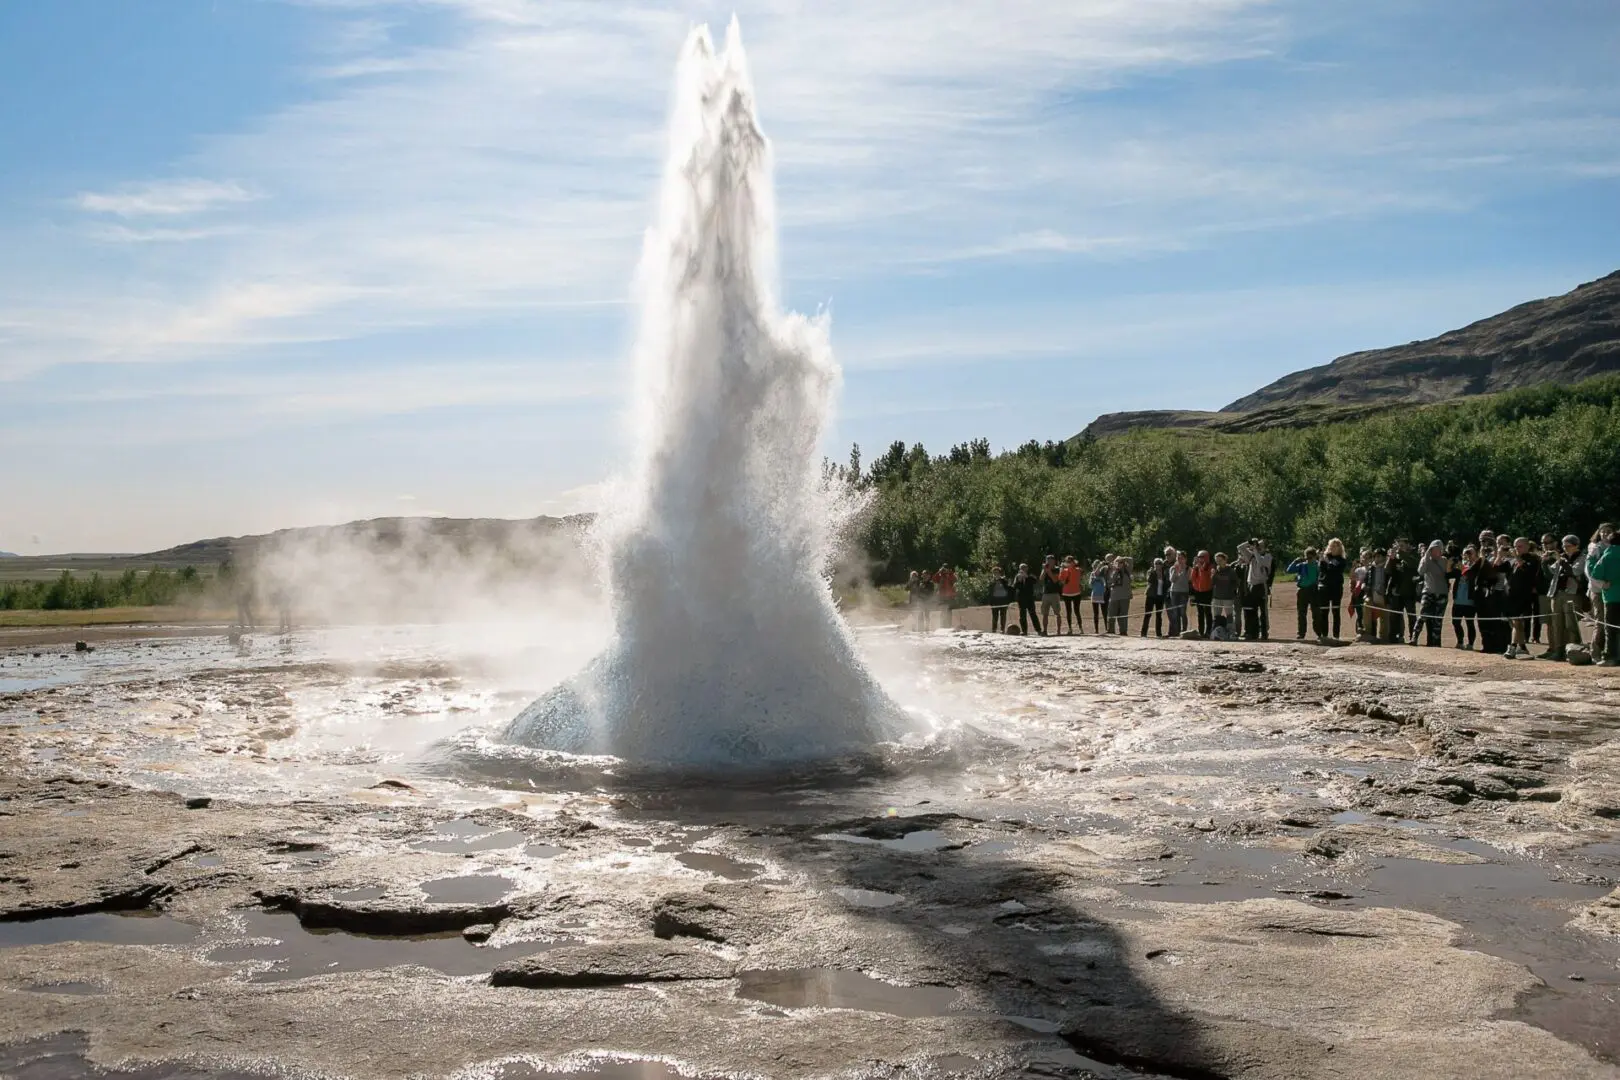 Attend a writing retreat in one of the world's most beautiful settings, Iceland. Get inspired by Icelandic nature at the golden circle, and by the professional writers who teach our workshops.